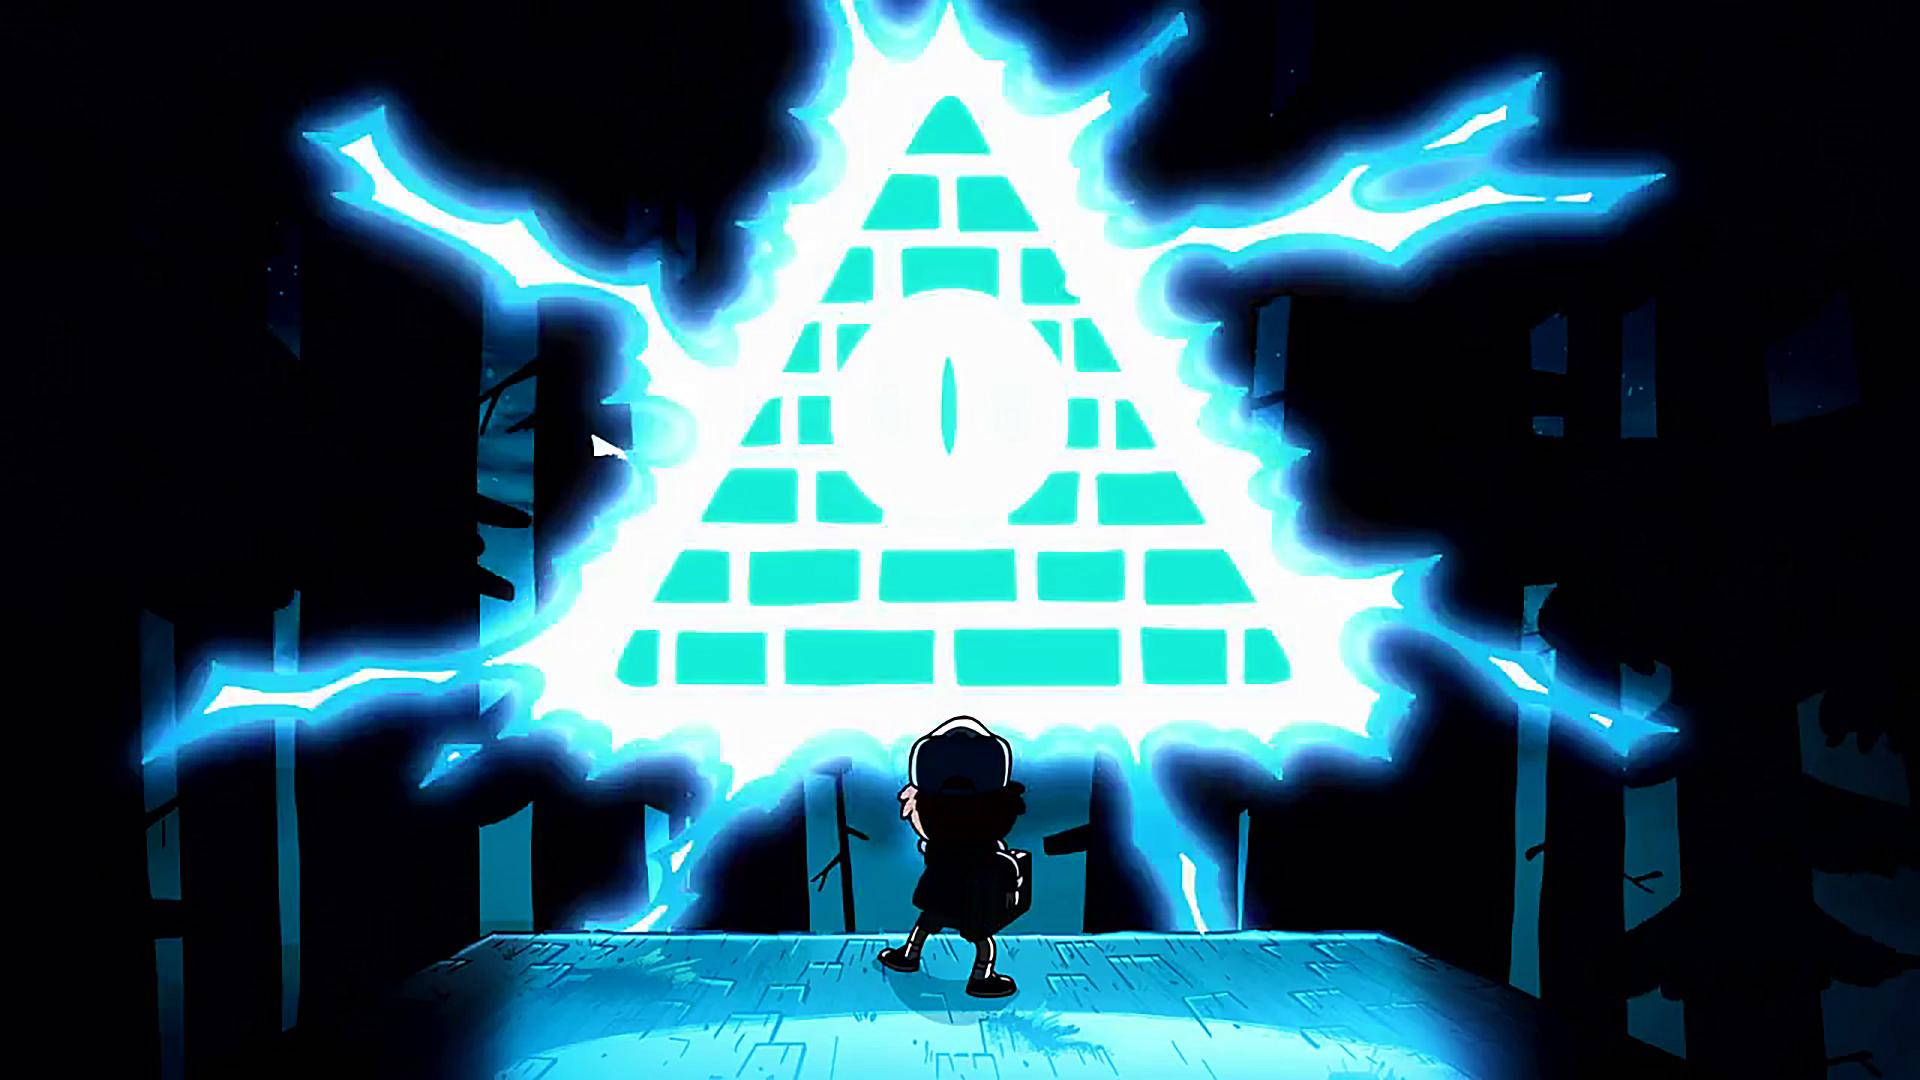 60 Gravity Falls HD Wallpapers and Backgrounds